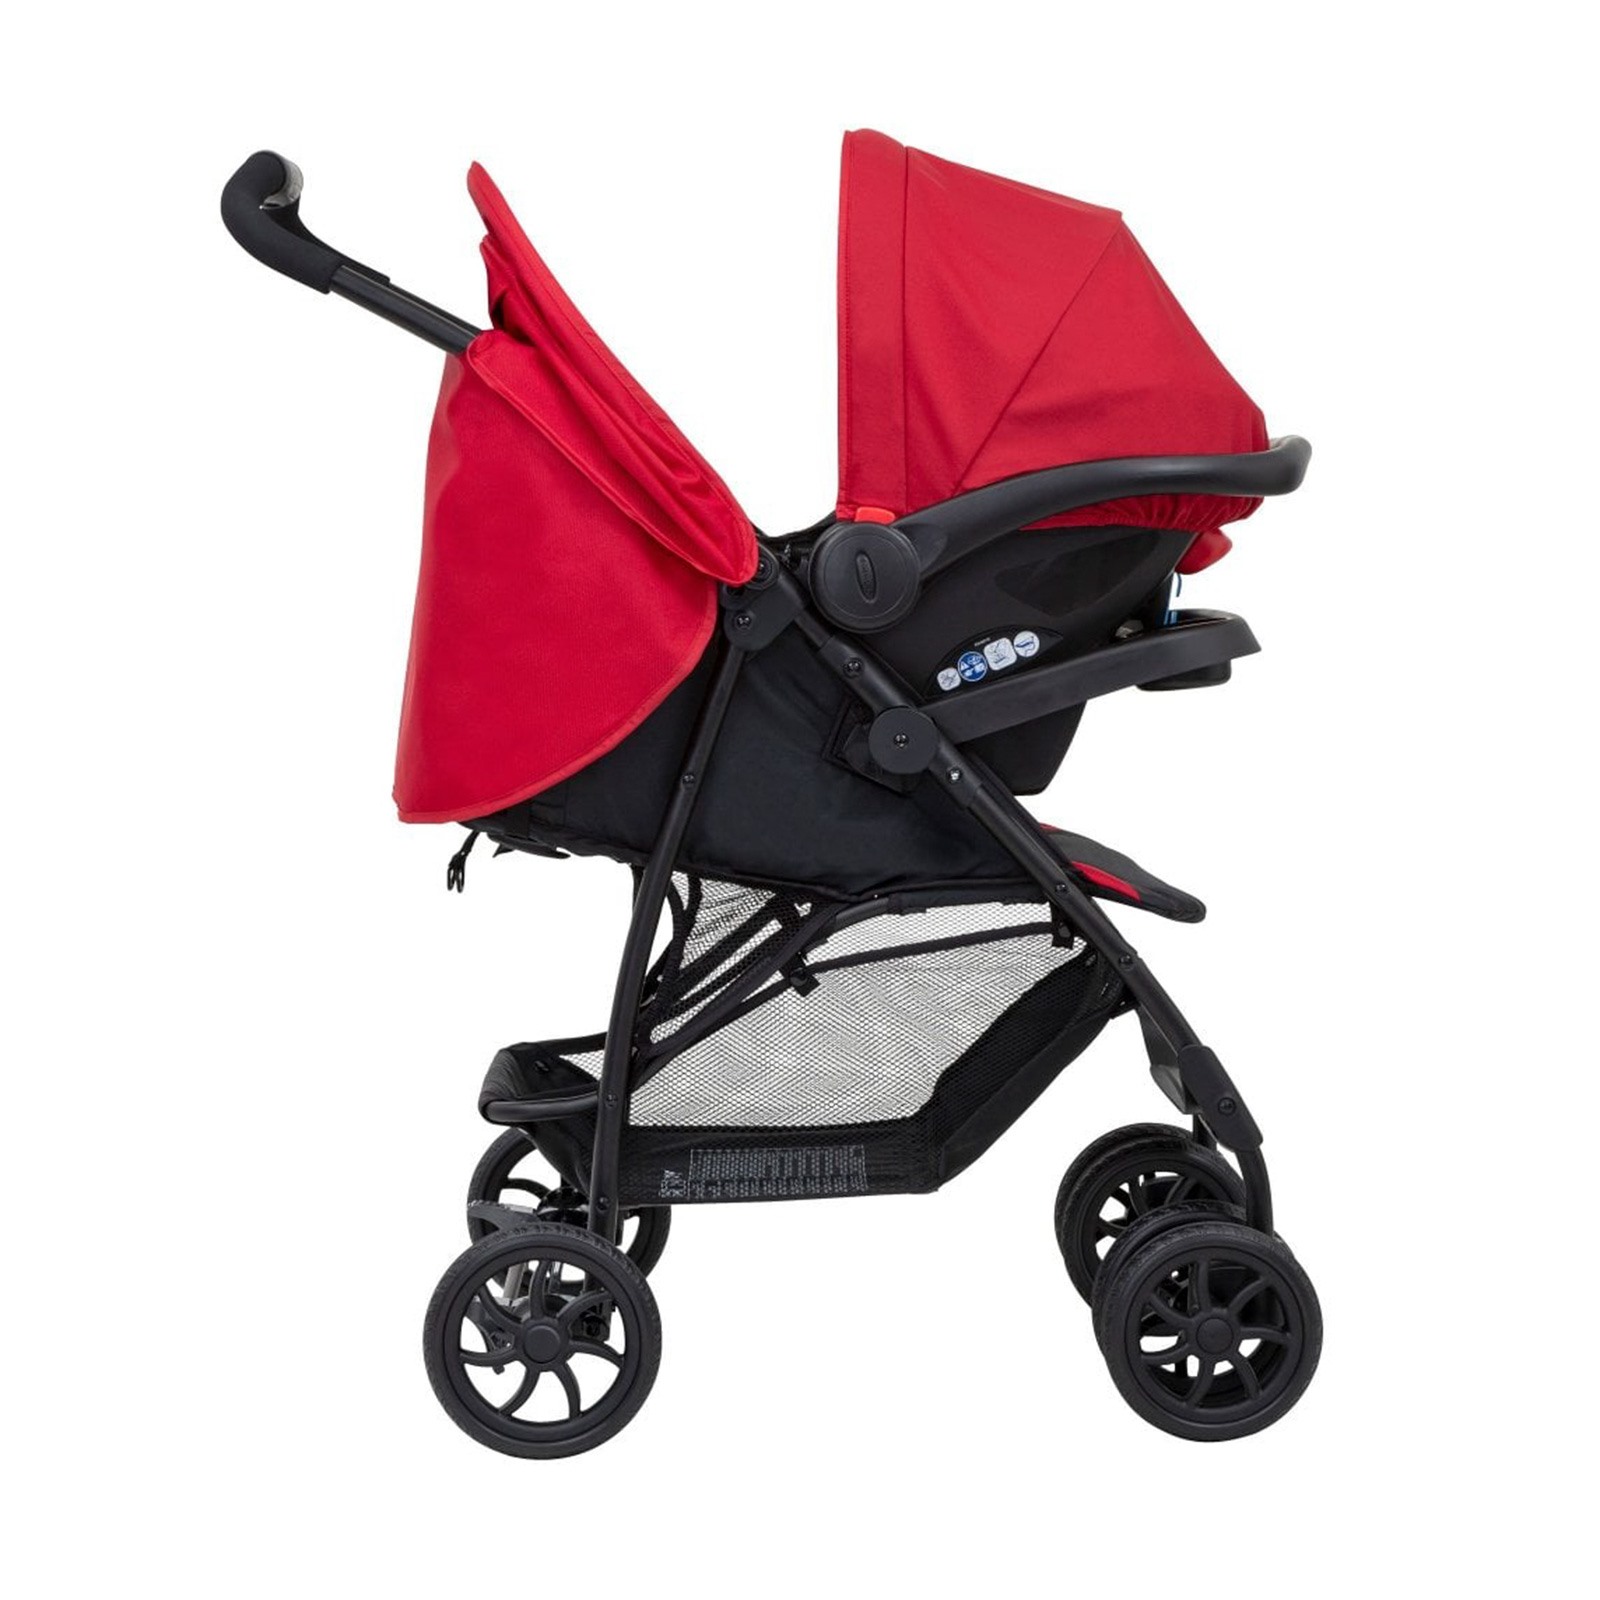 graco mirage travel system